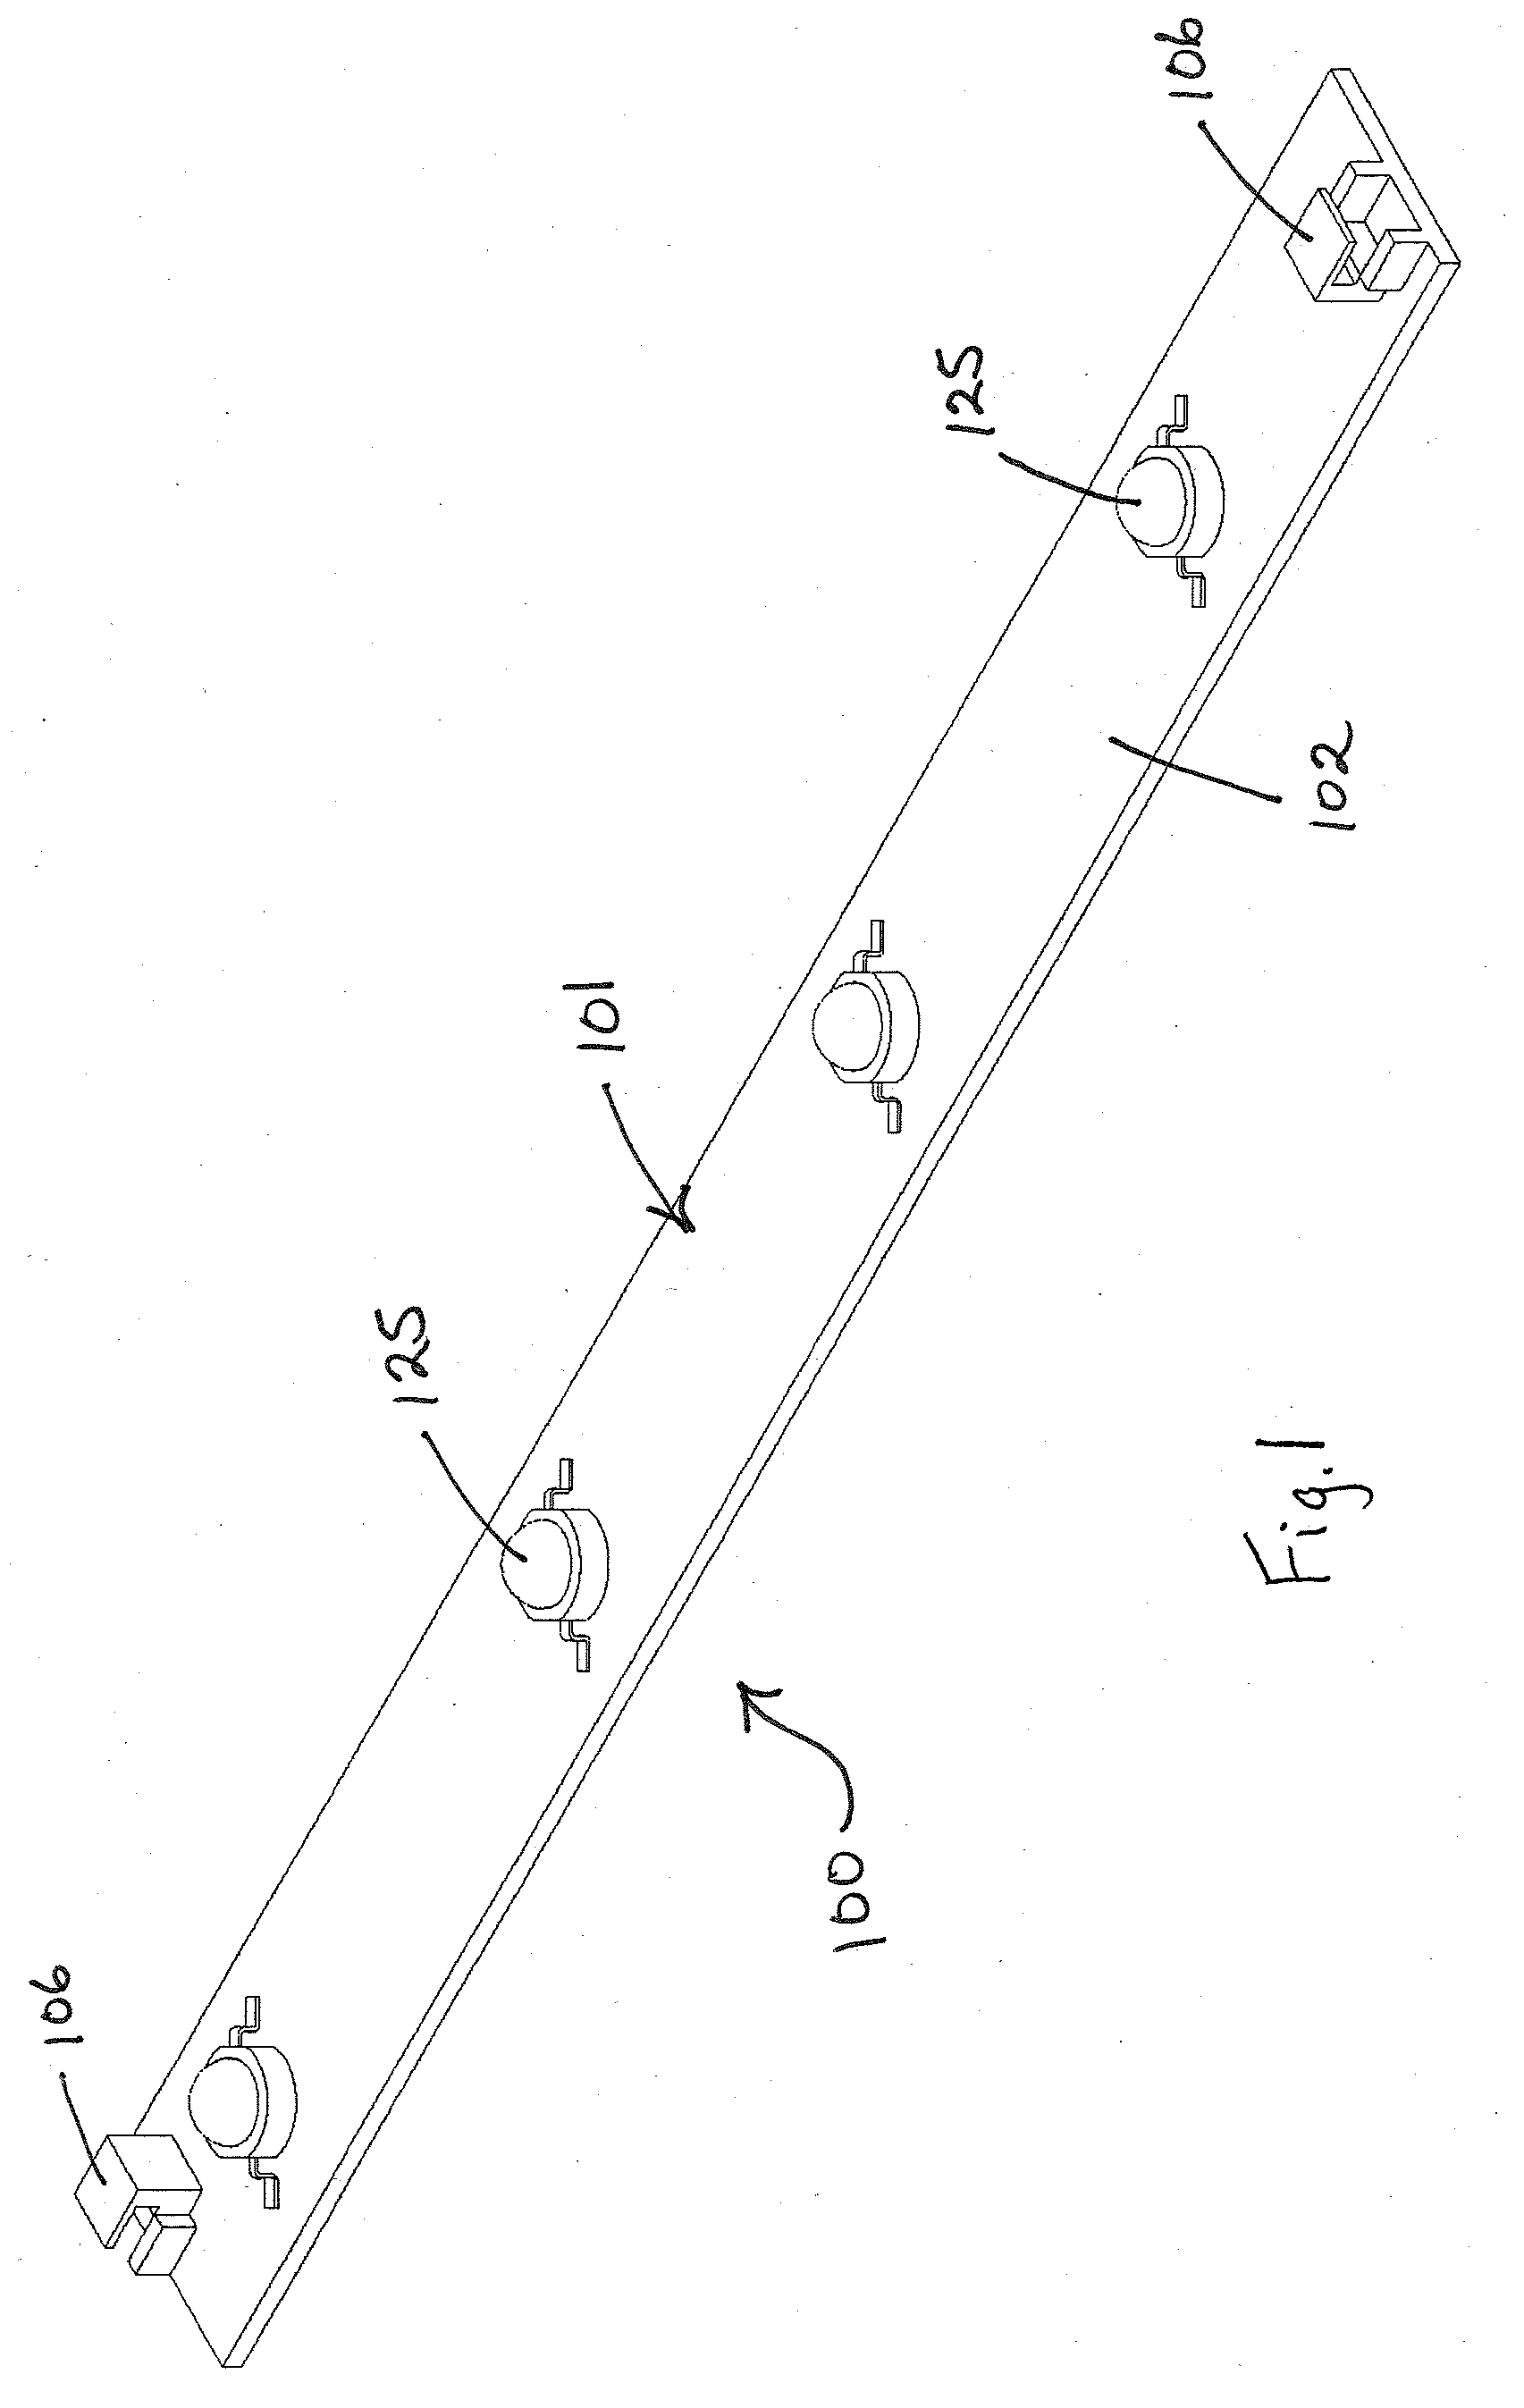 Layered structure for use with high power light emitting diode systems